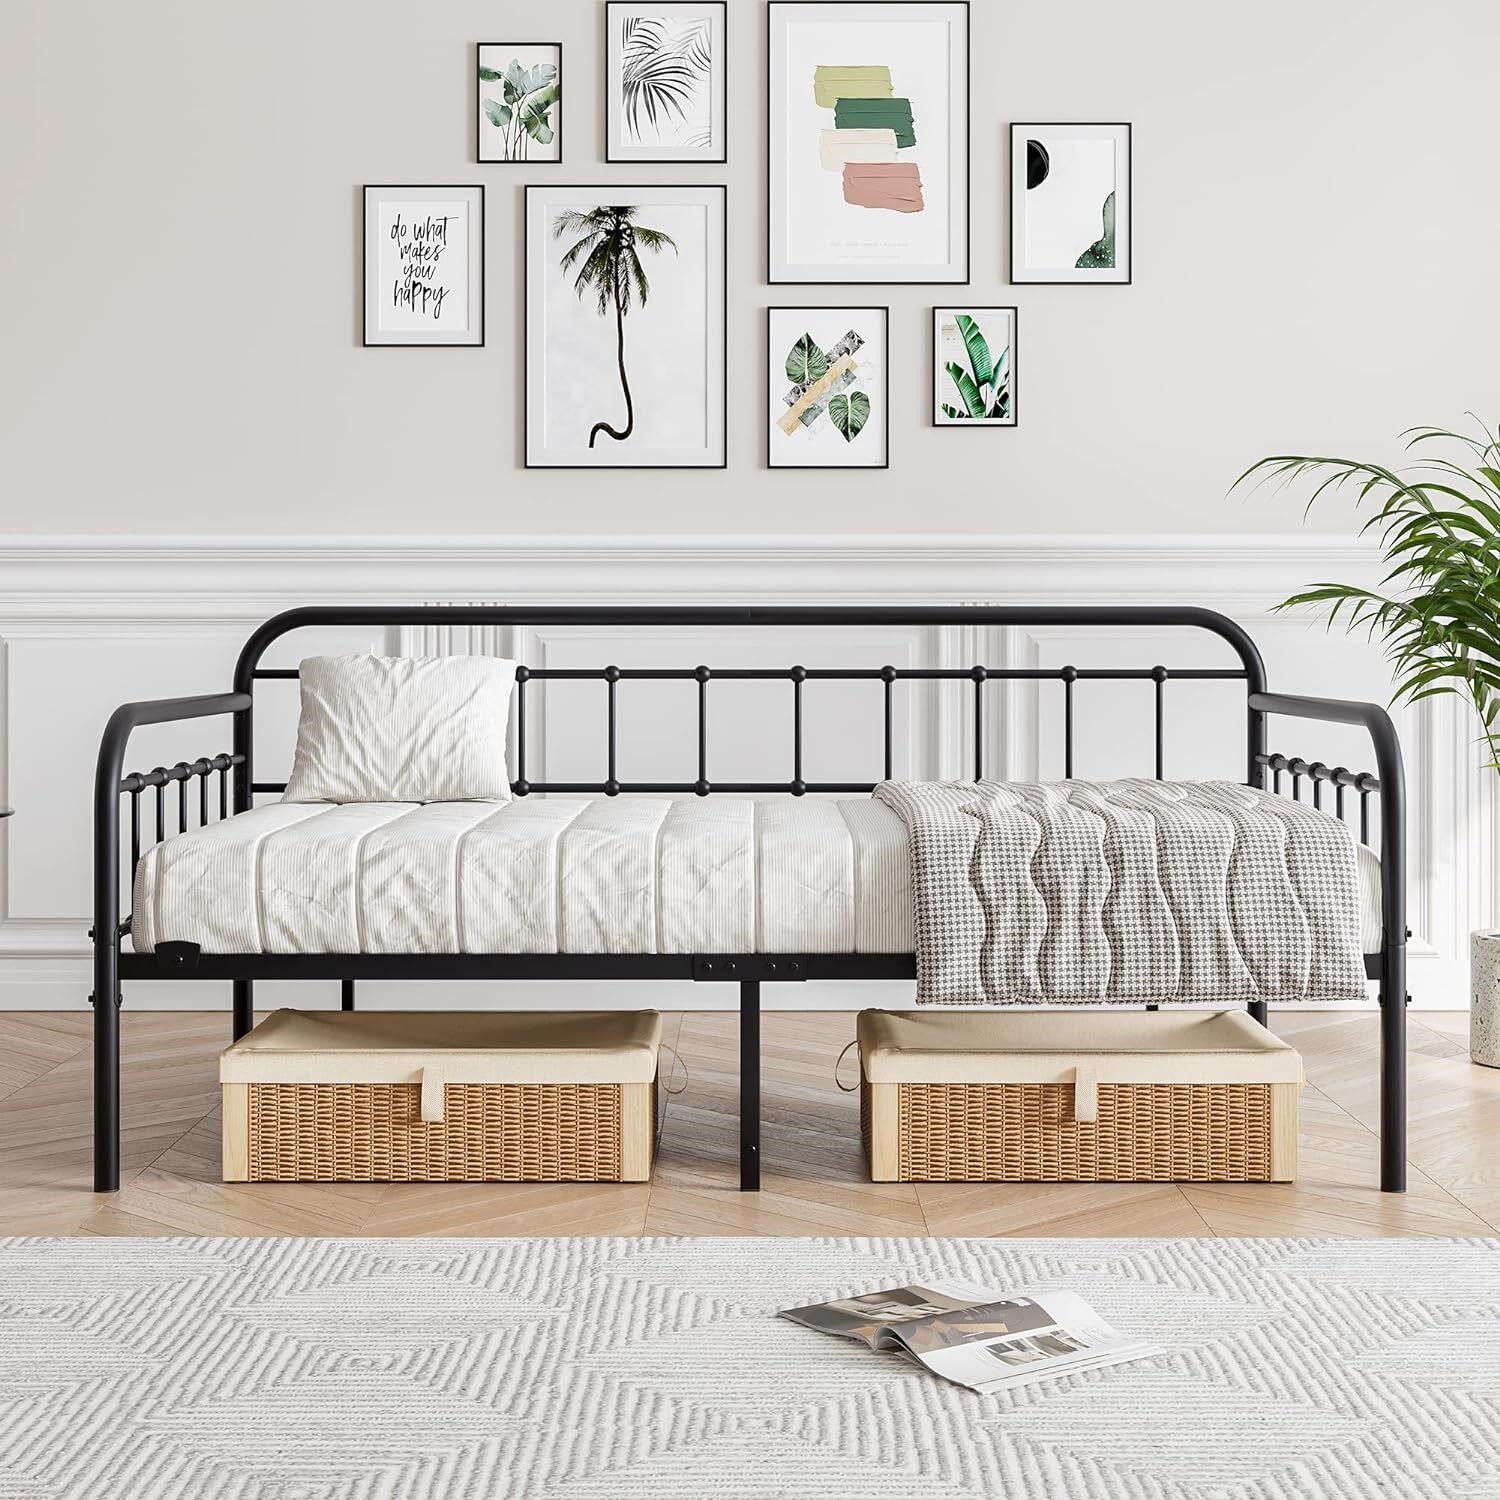 JURMERRY Metal Daybed Frame Twin Size  Black